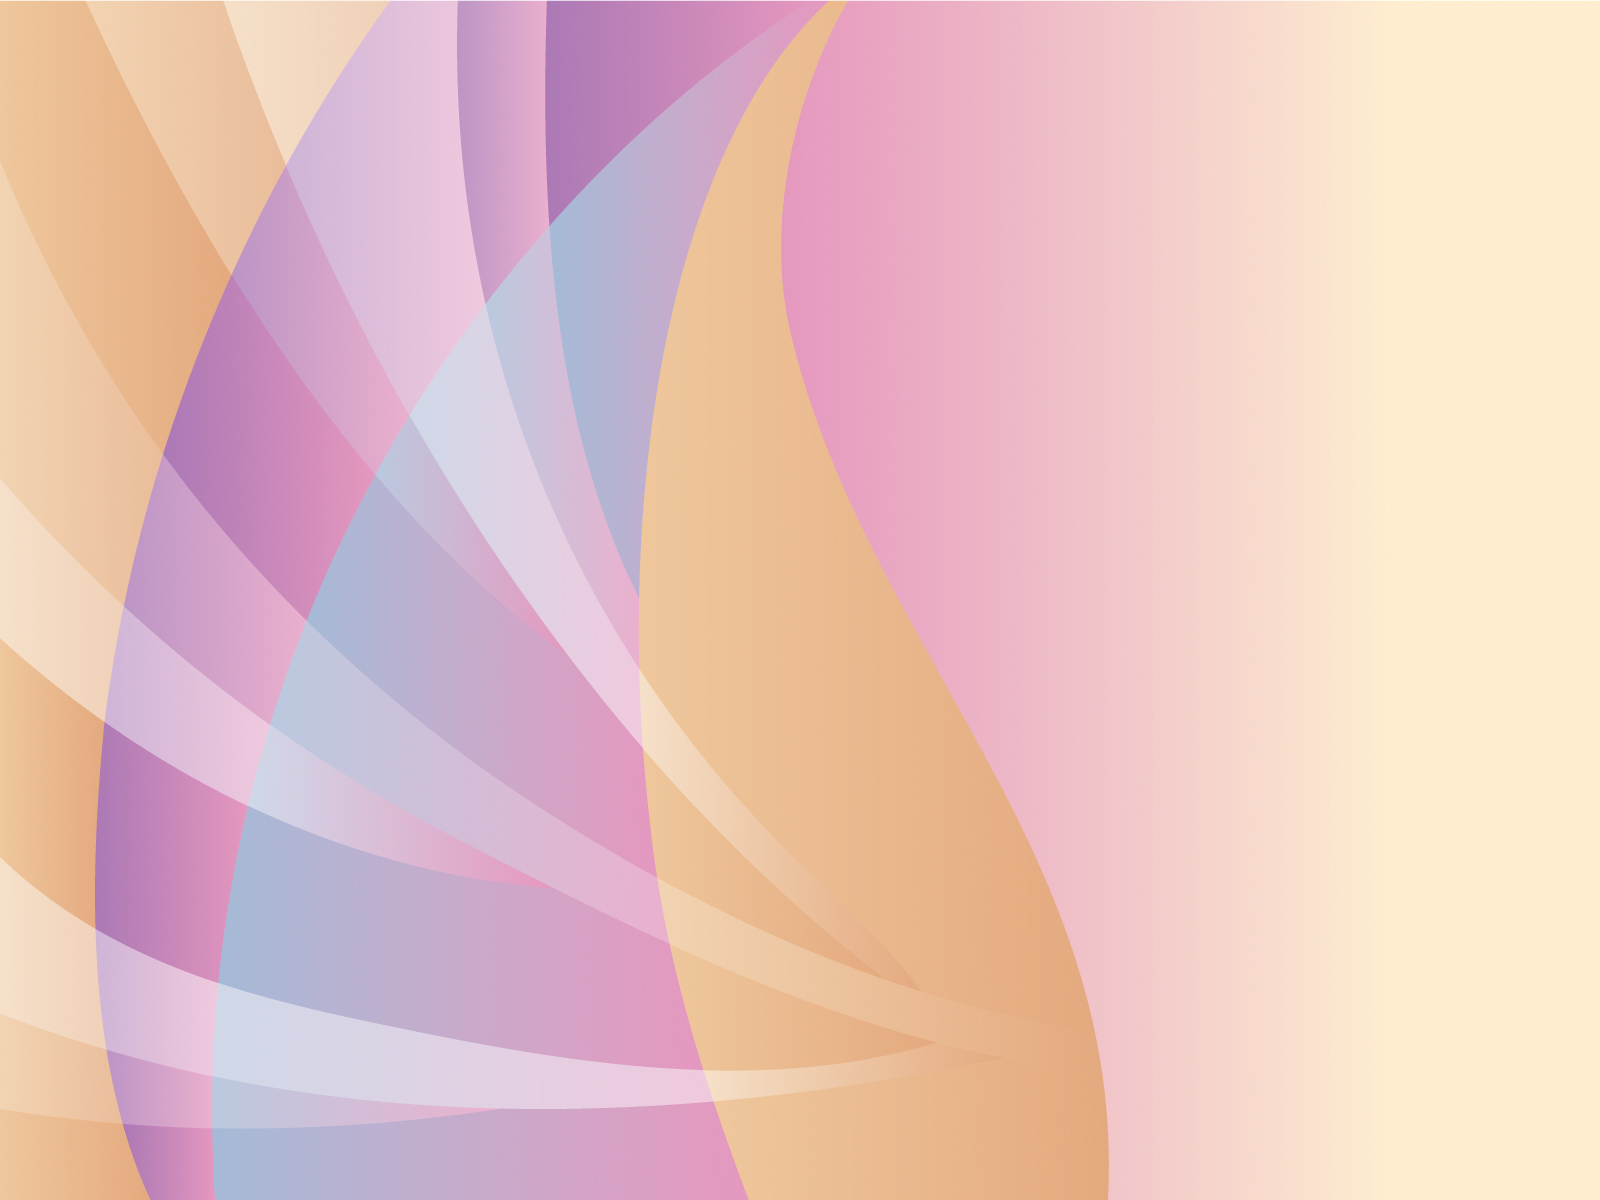 Pink Leaf Abstract Powerpoint Templates - Abstract, Fuchsia / Magenta,  Orange - Free PPT Backgrounds and Templates